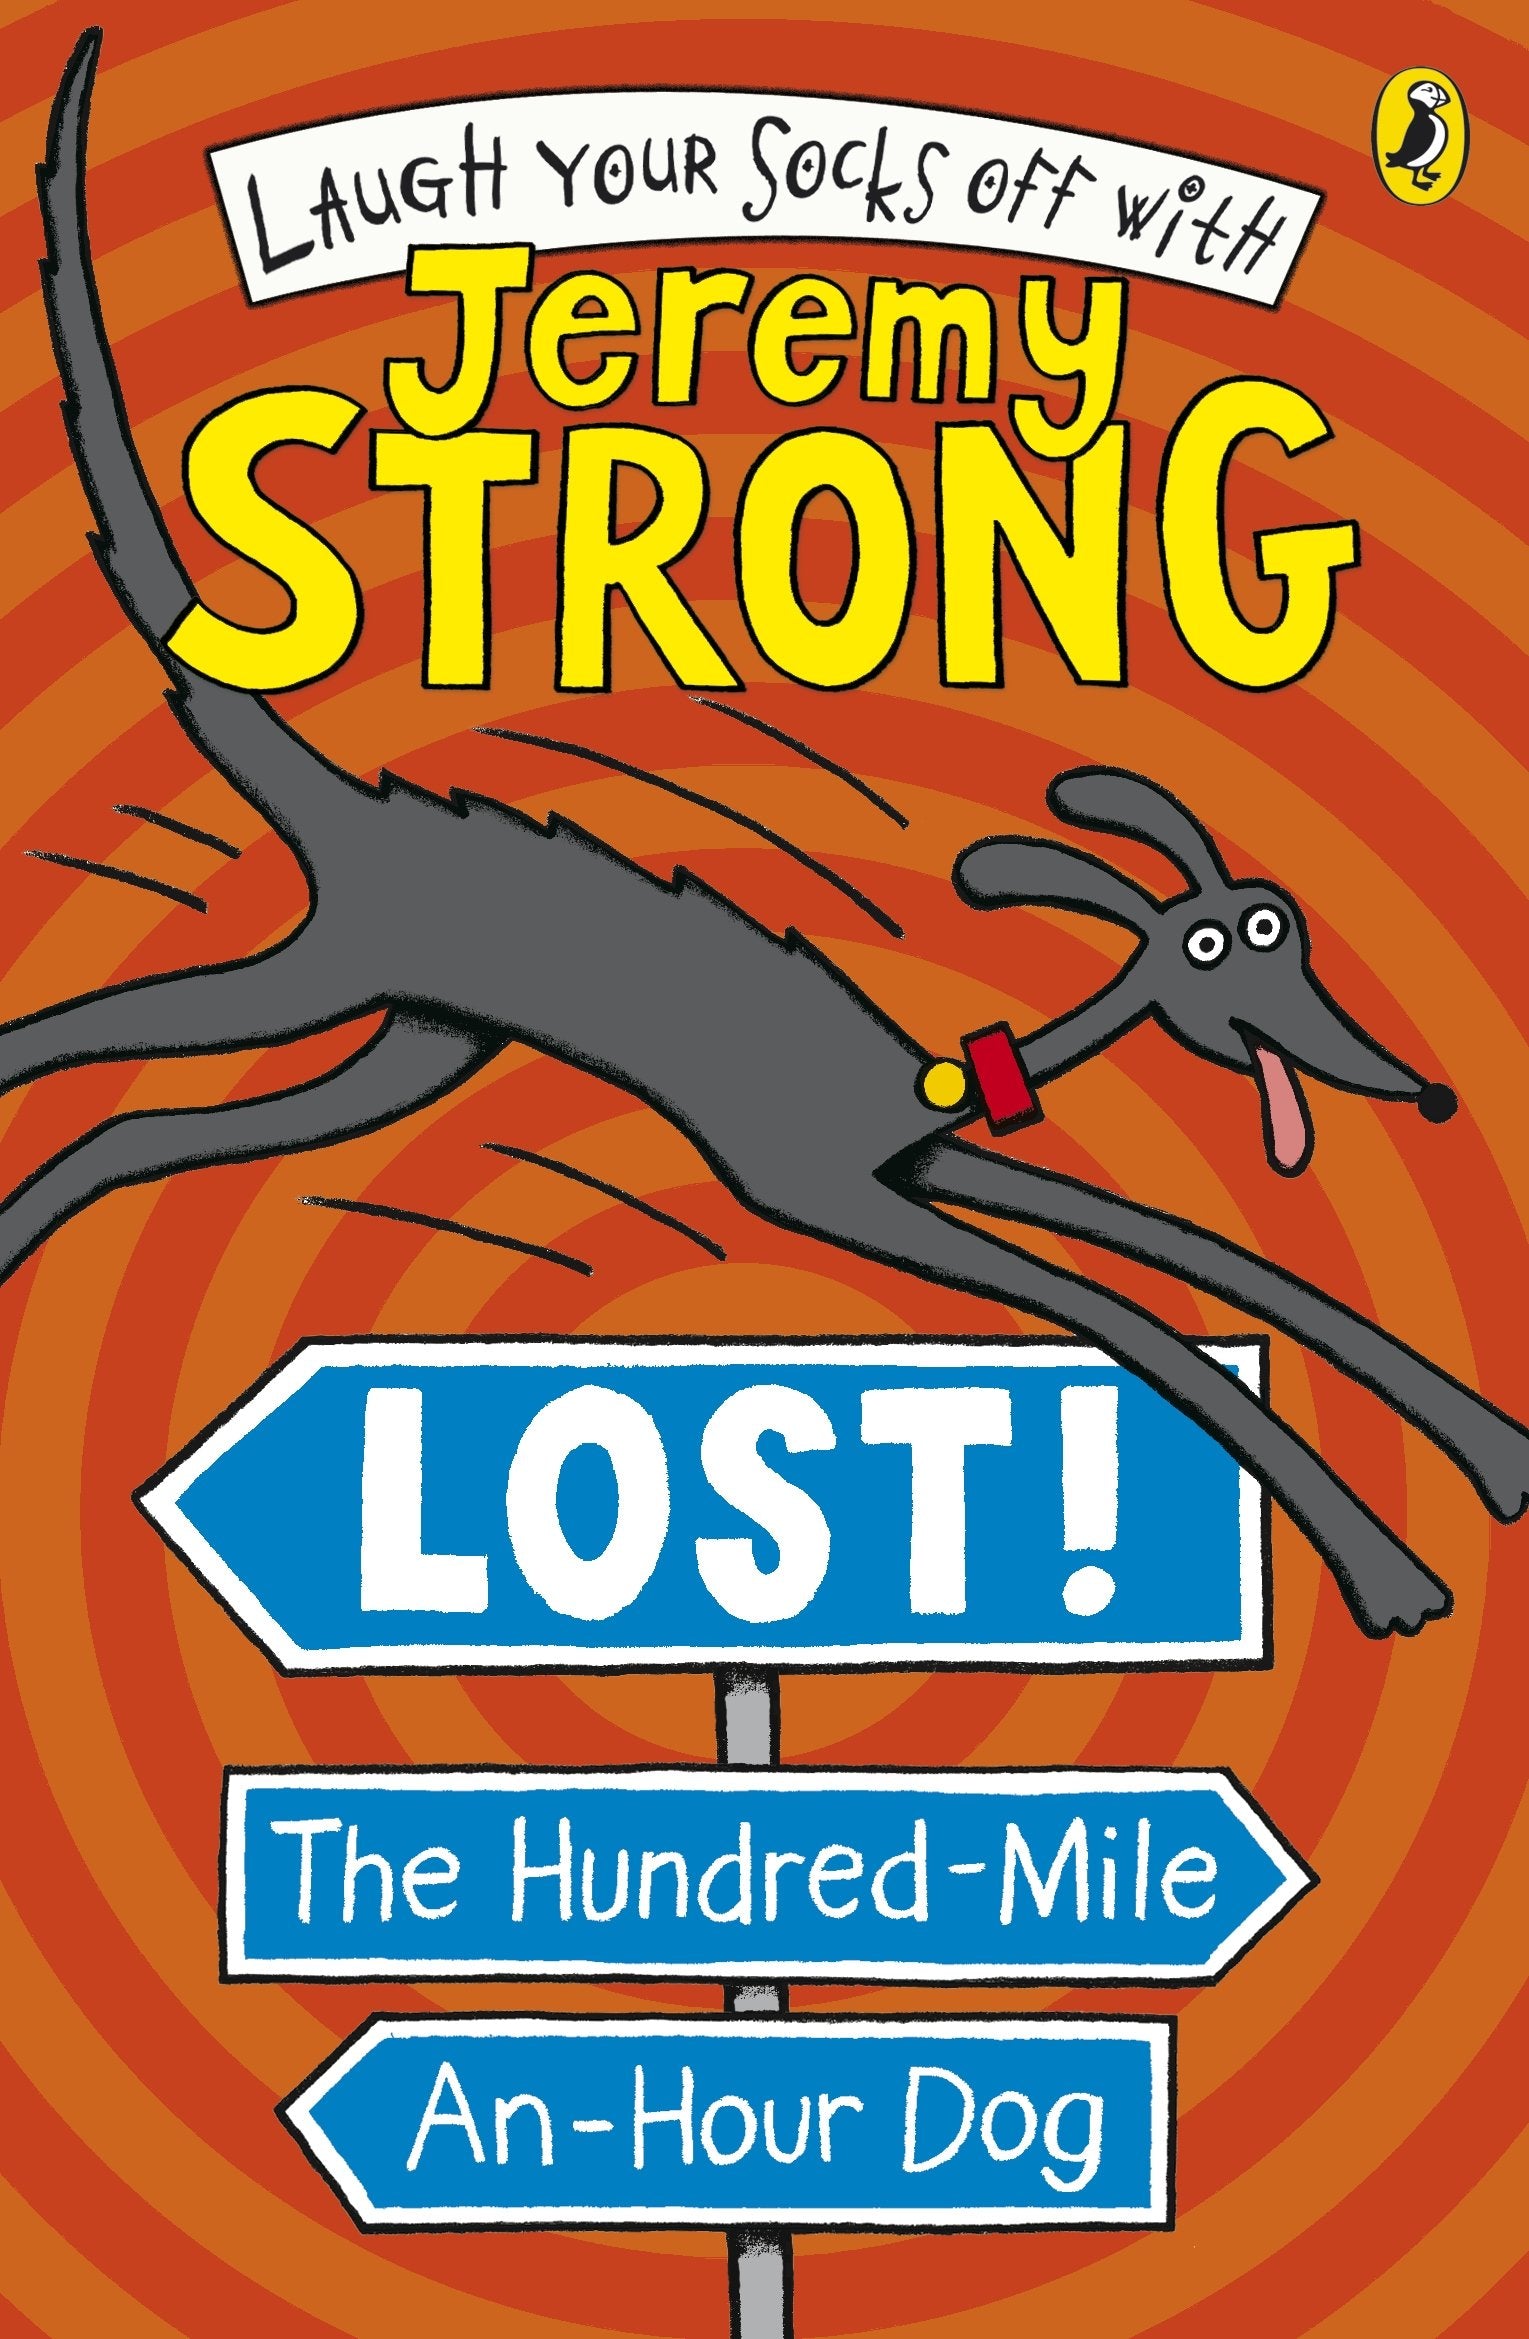 Jeremy Strong LOST! Hundred Mile an Hour Dog | Card Merchant Takapuna